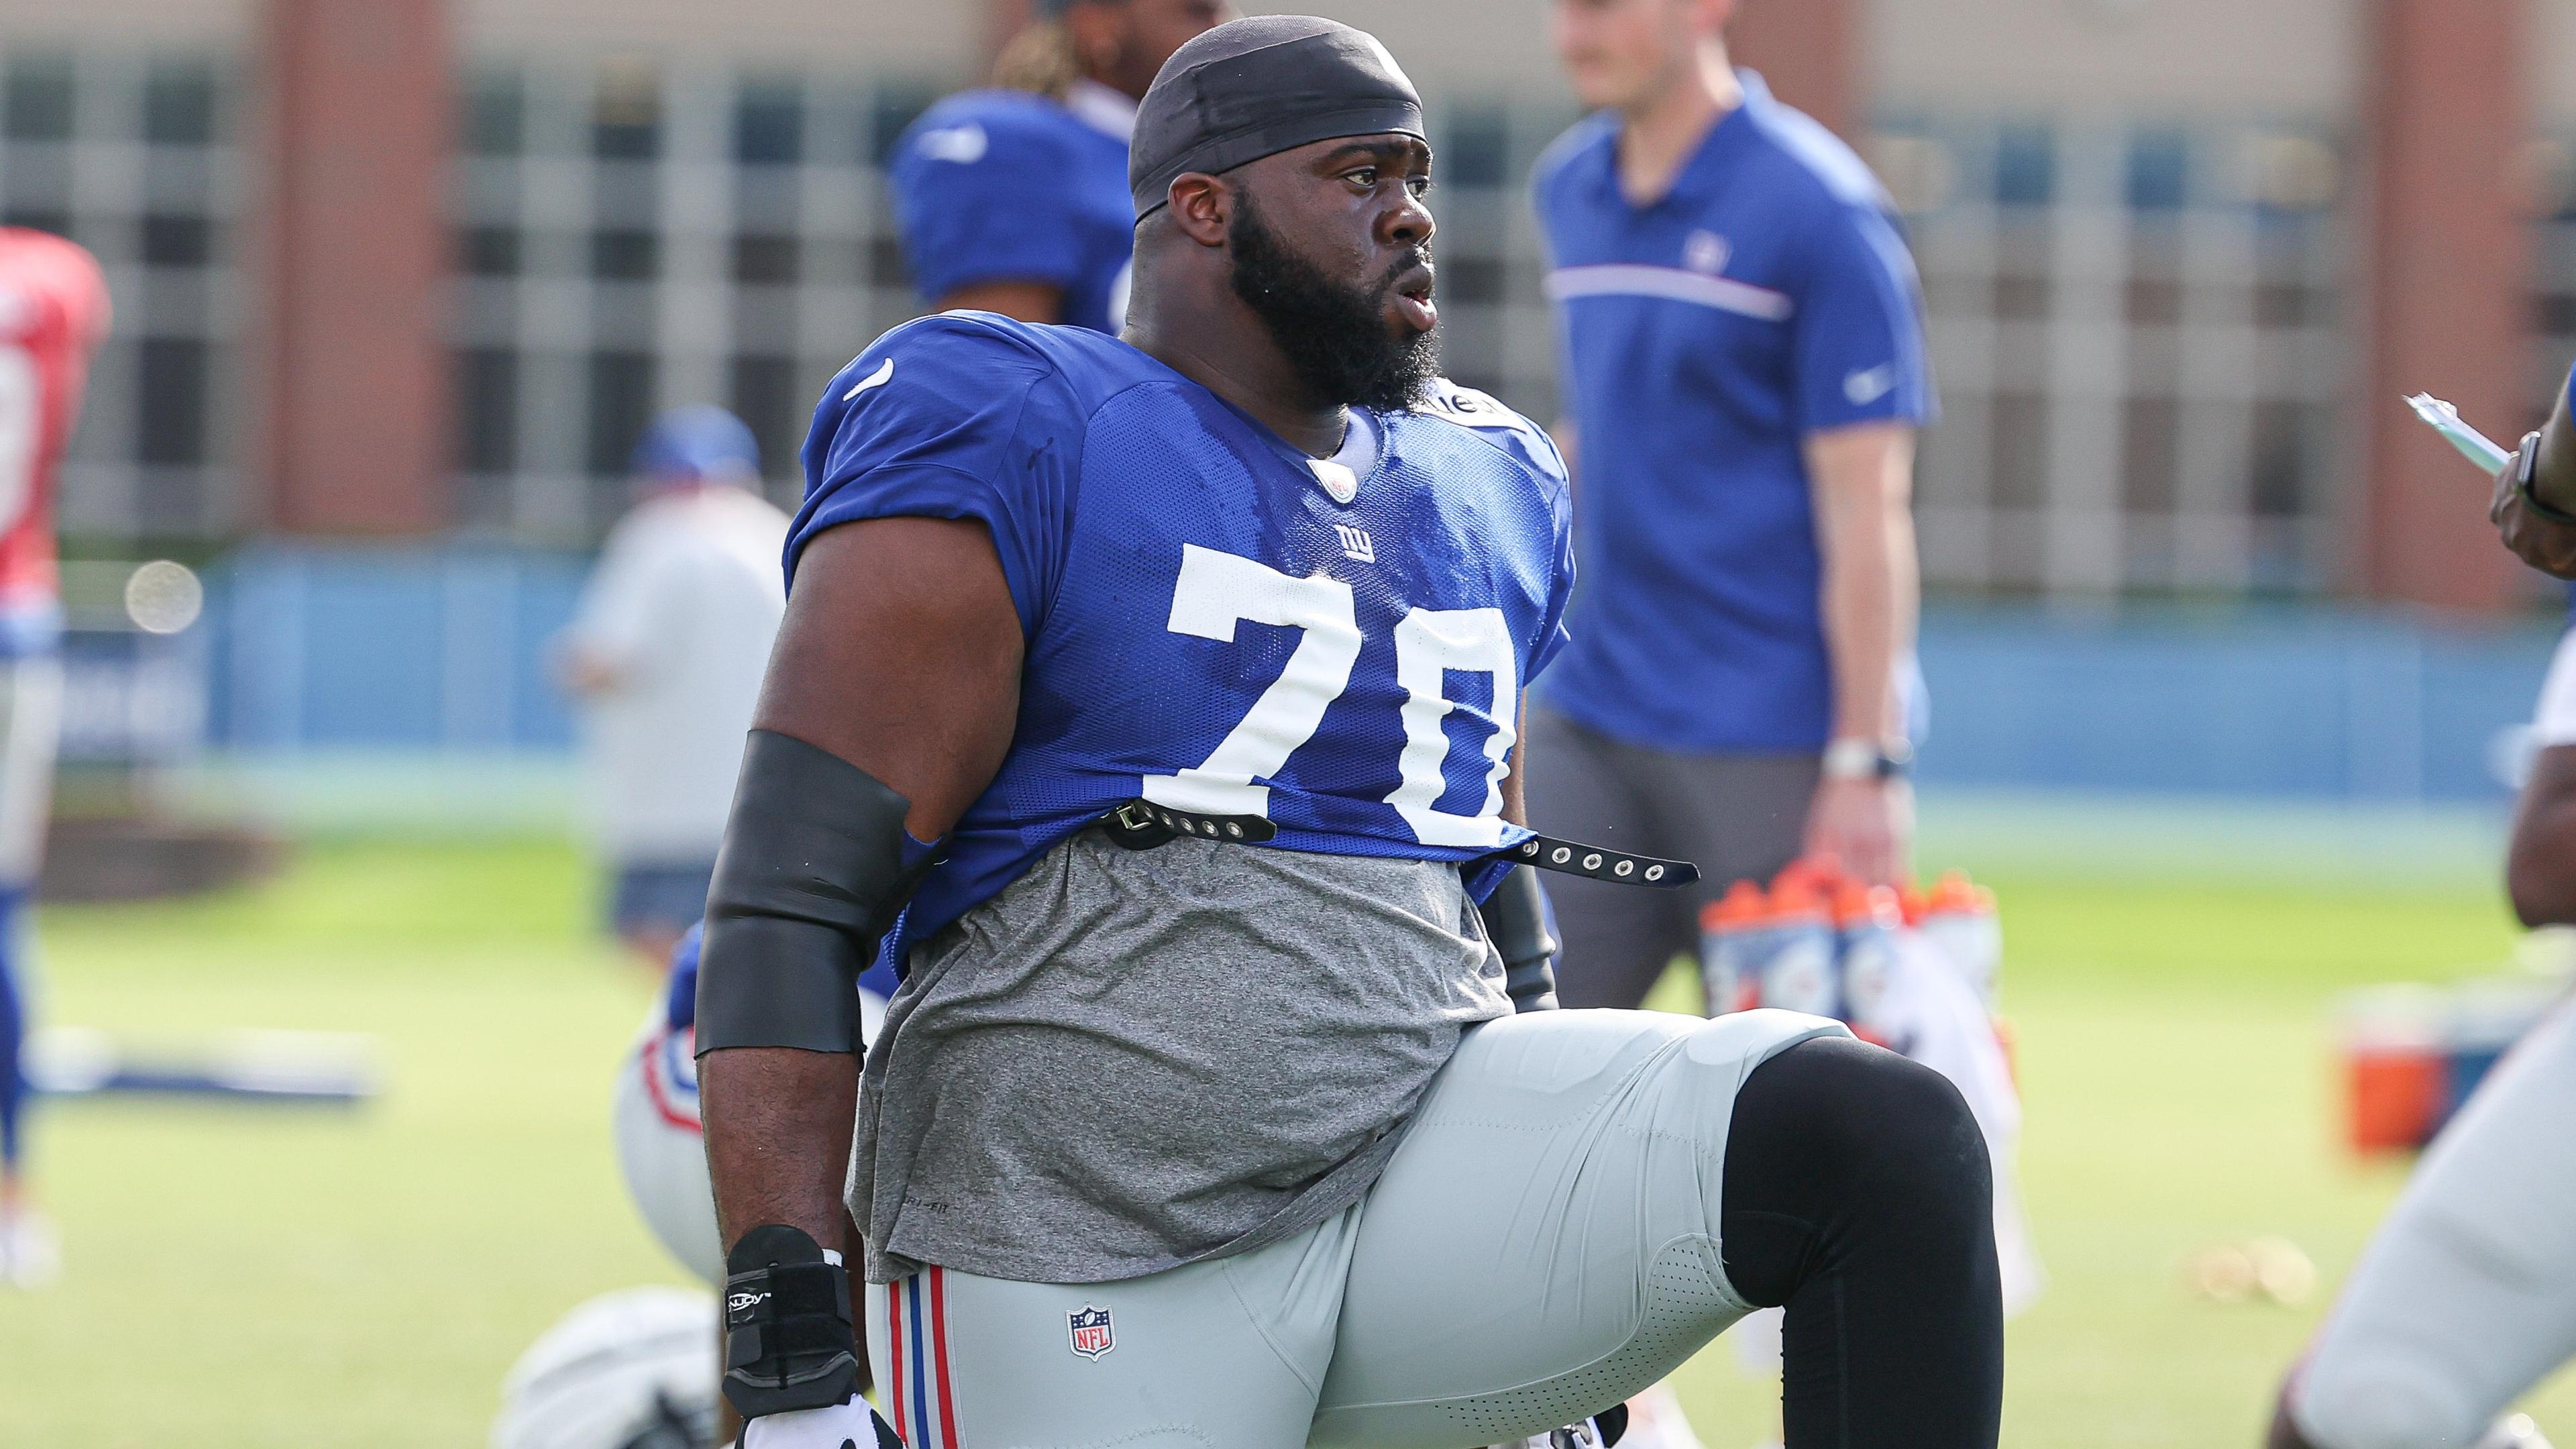 New York Giants offensive tackle Korey Cunningham (70) stretches during training camp at the Quest Diagnostics Training Facility / Vincent Carchietta - USA TODAY Sports